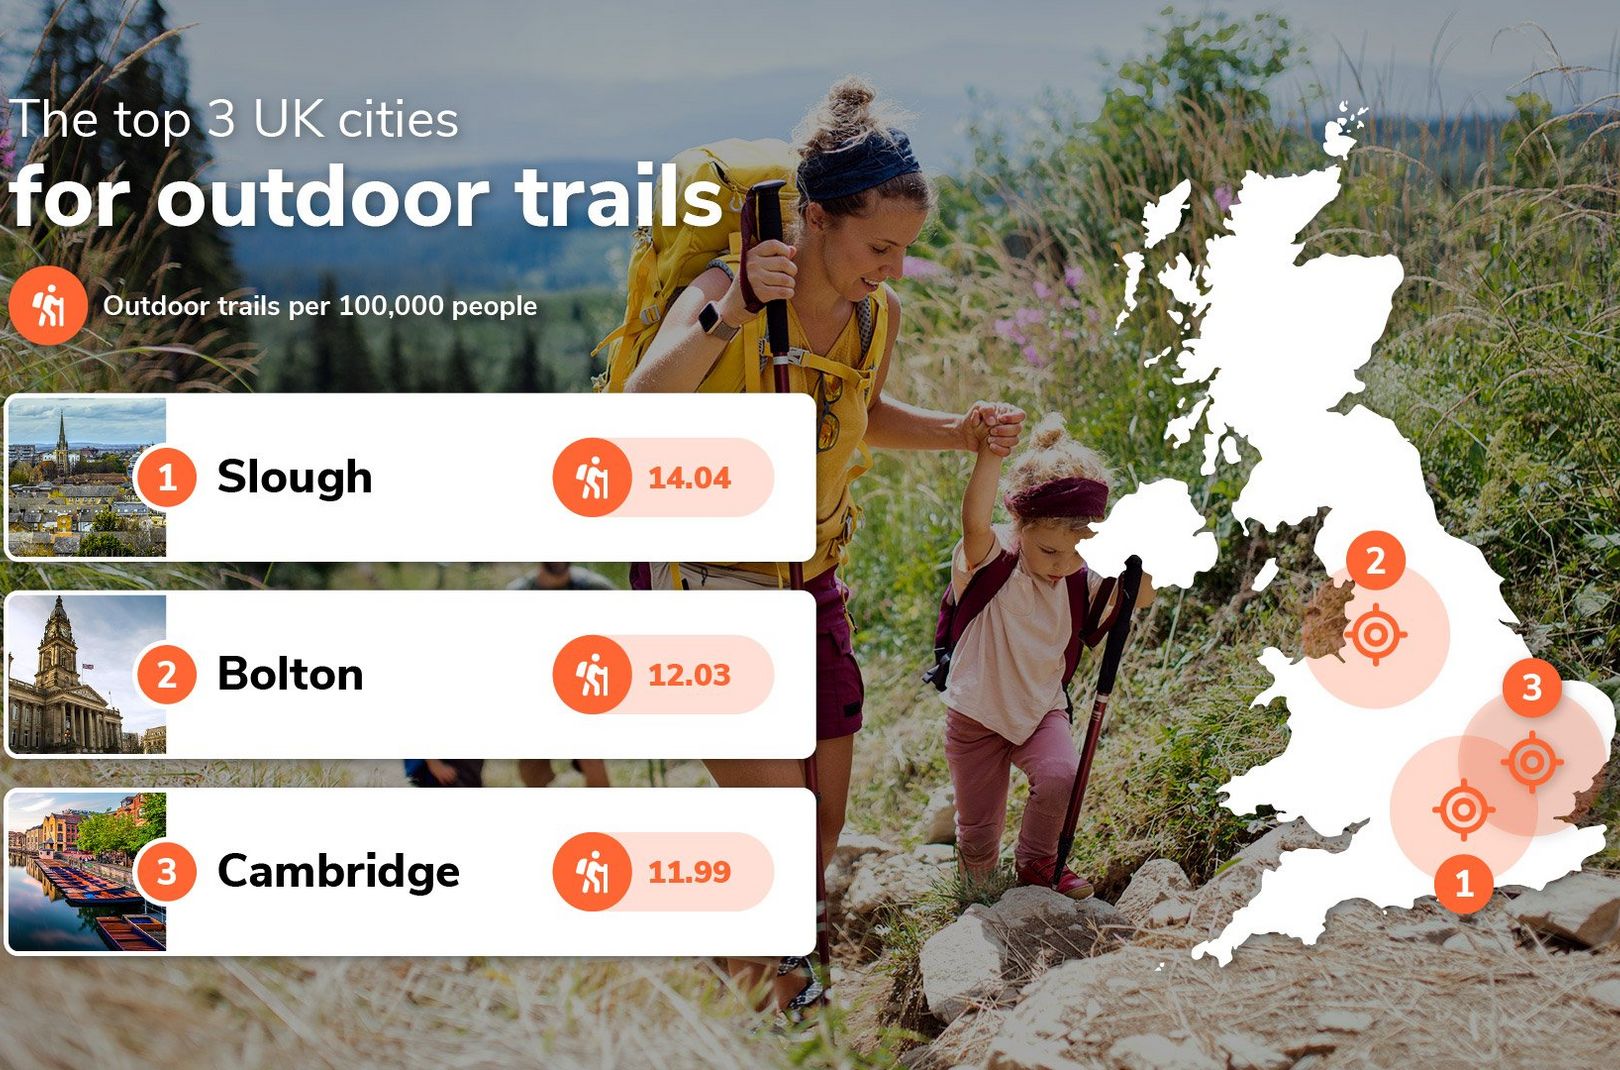 The UK’s top 3 cities for outdoor trails